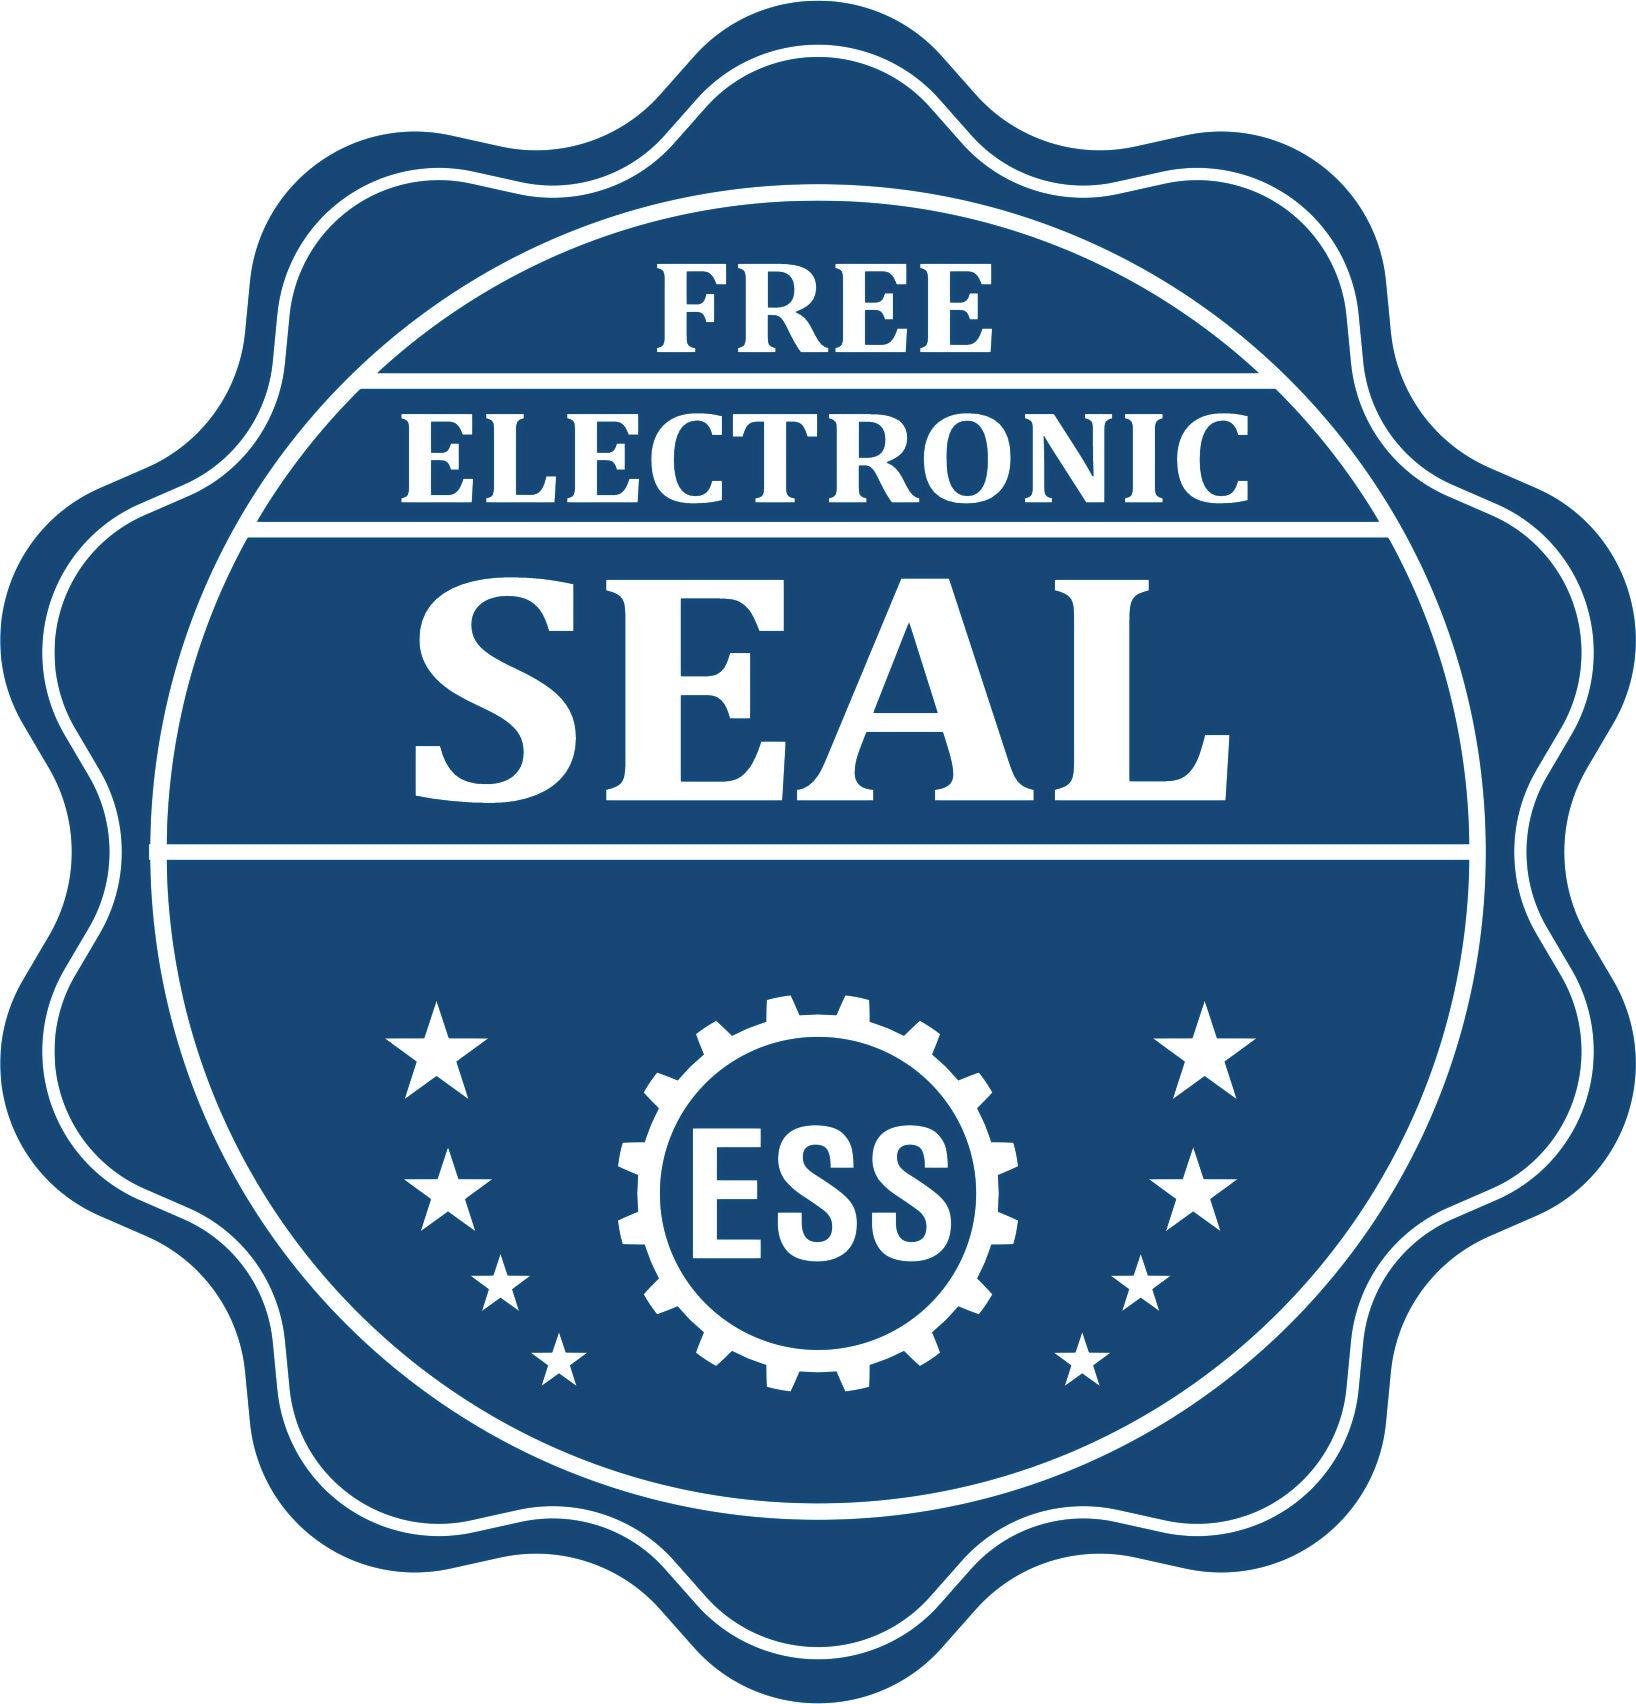 A badge showing a free electronic seal for the Heavy Duty Cast Iron Wisconsin Engineer Seal Embosser with stars and the ESS gear on the emblem.